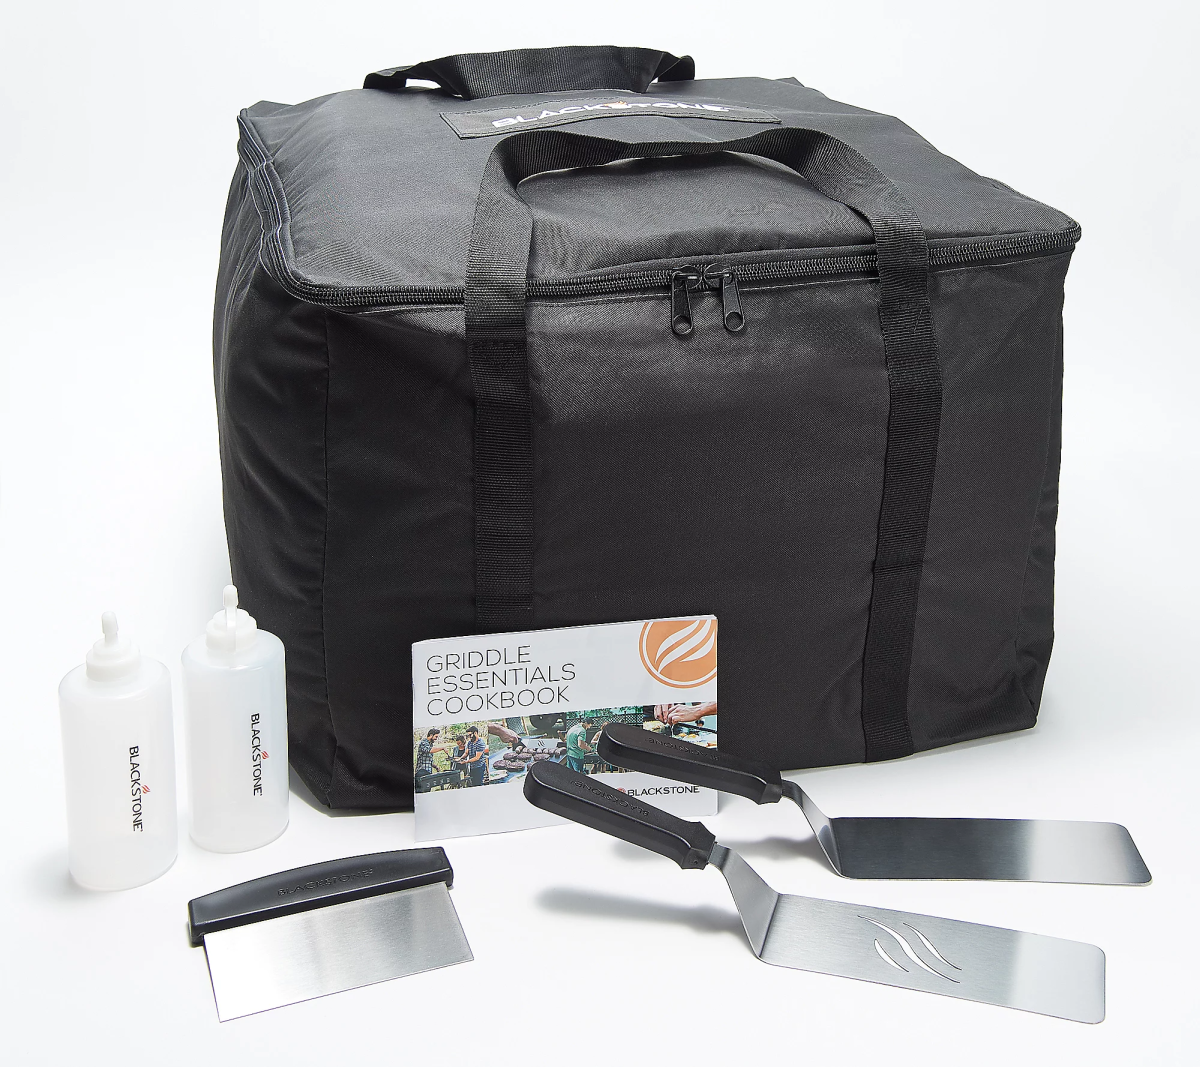 A Blackstone Griddle Grill Set with easy carry bag